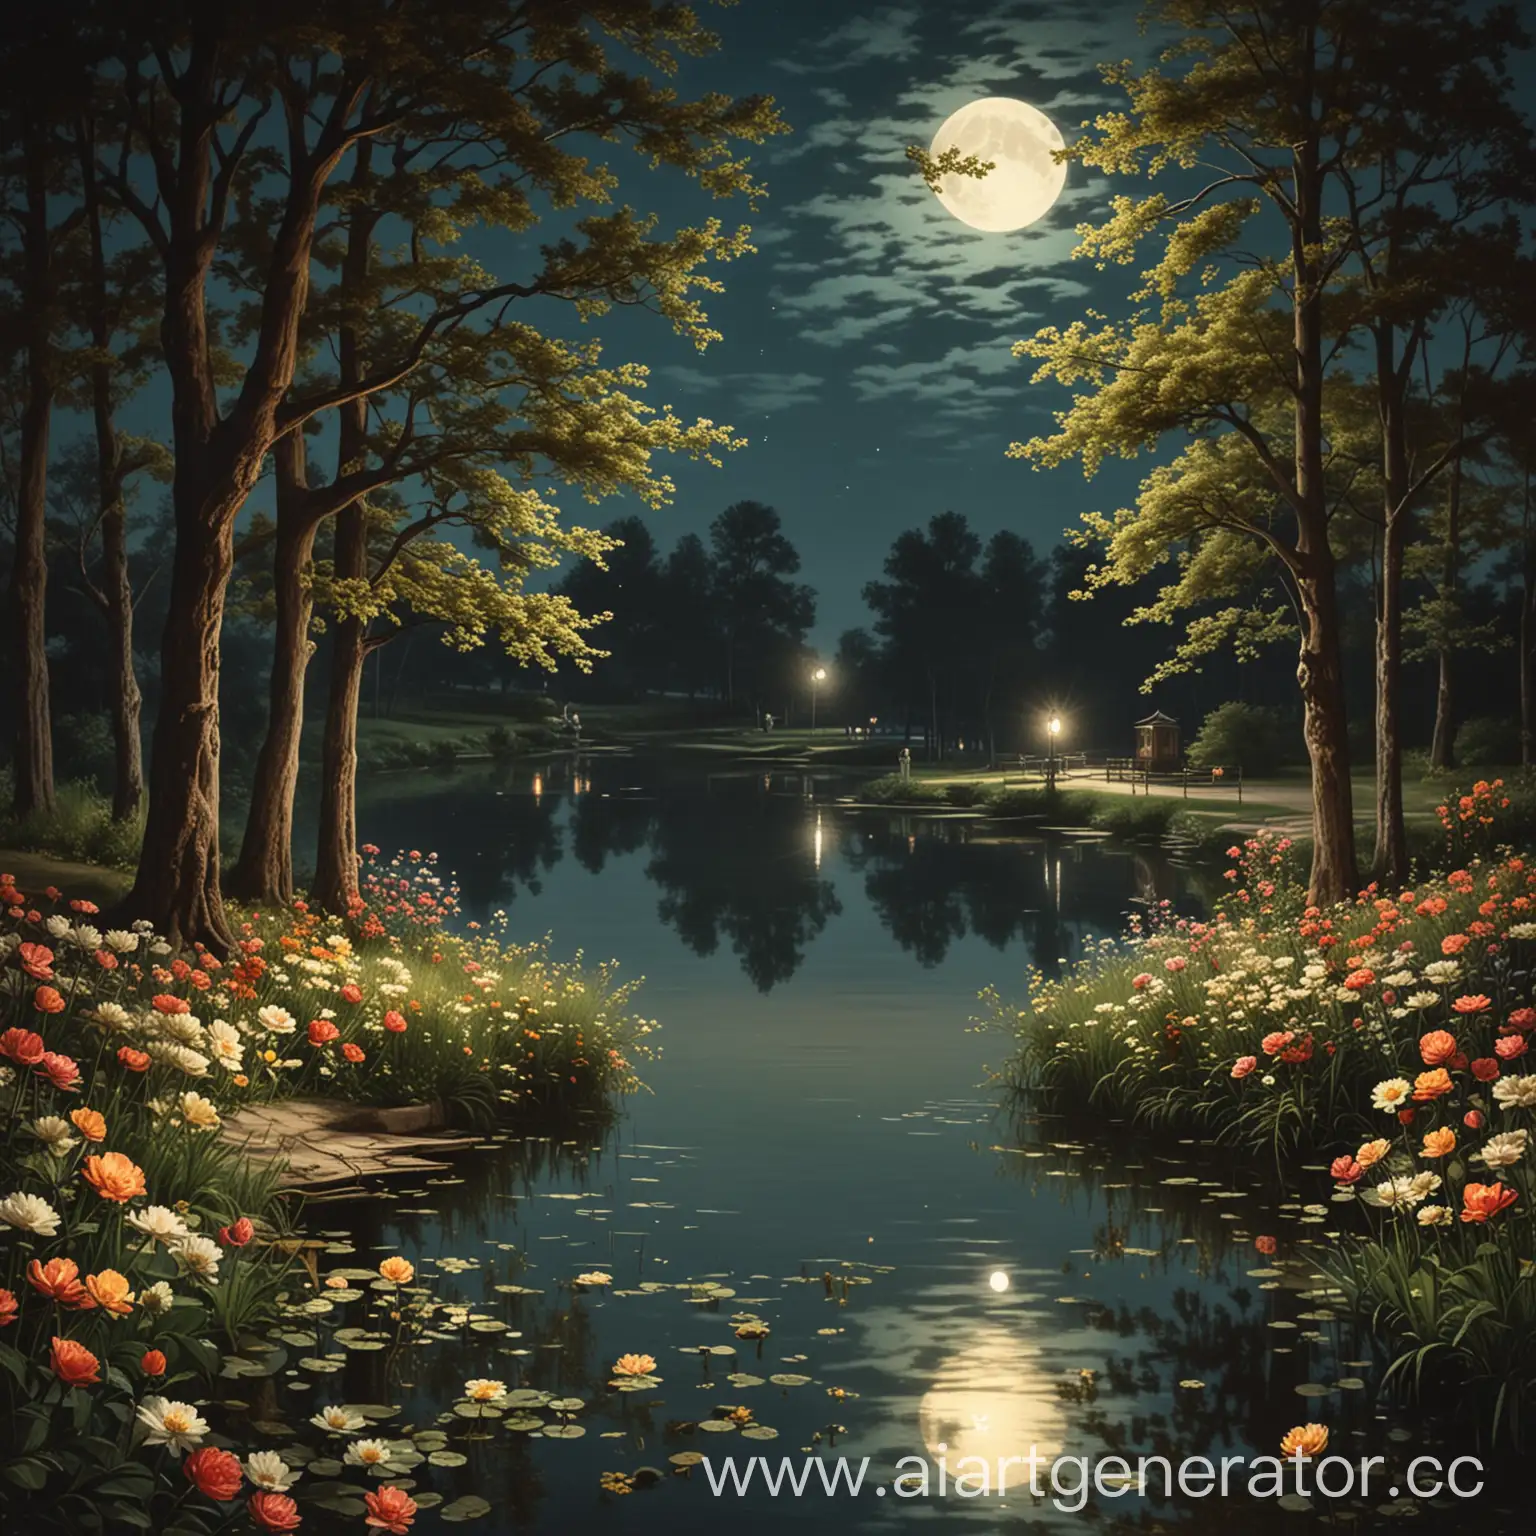 Moonlit-Night-in-a-20th-Century-Park-with-Trees-Lake-and-Flowers